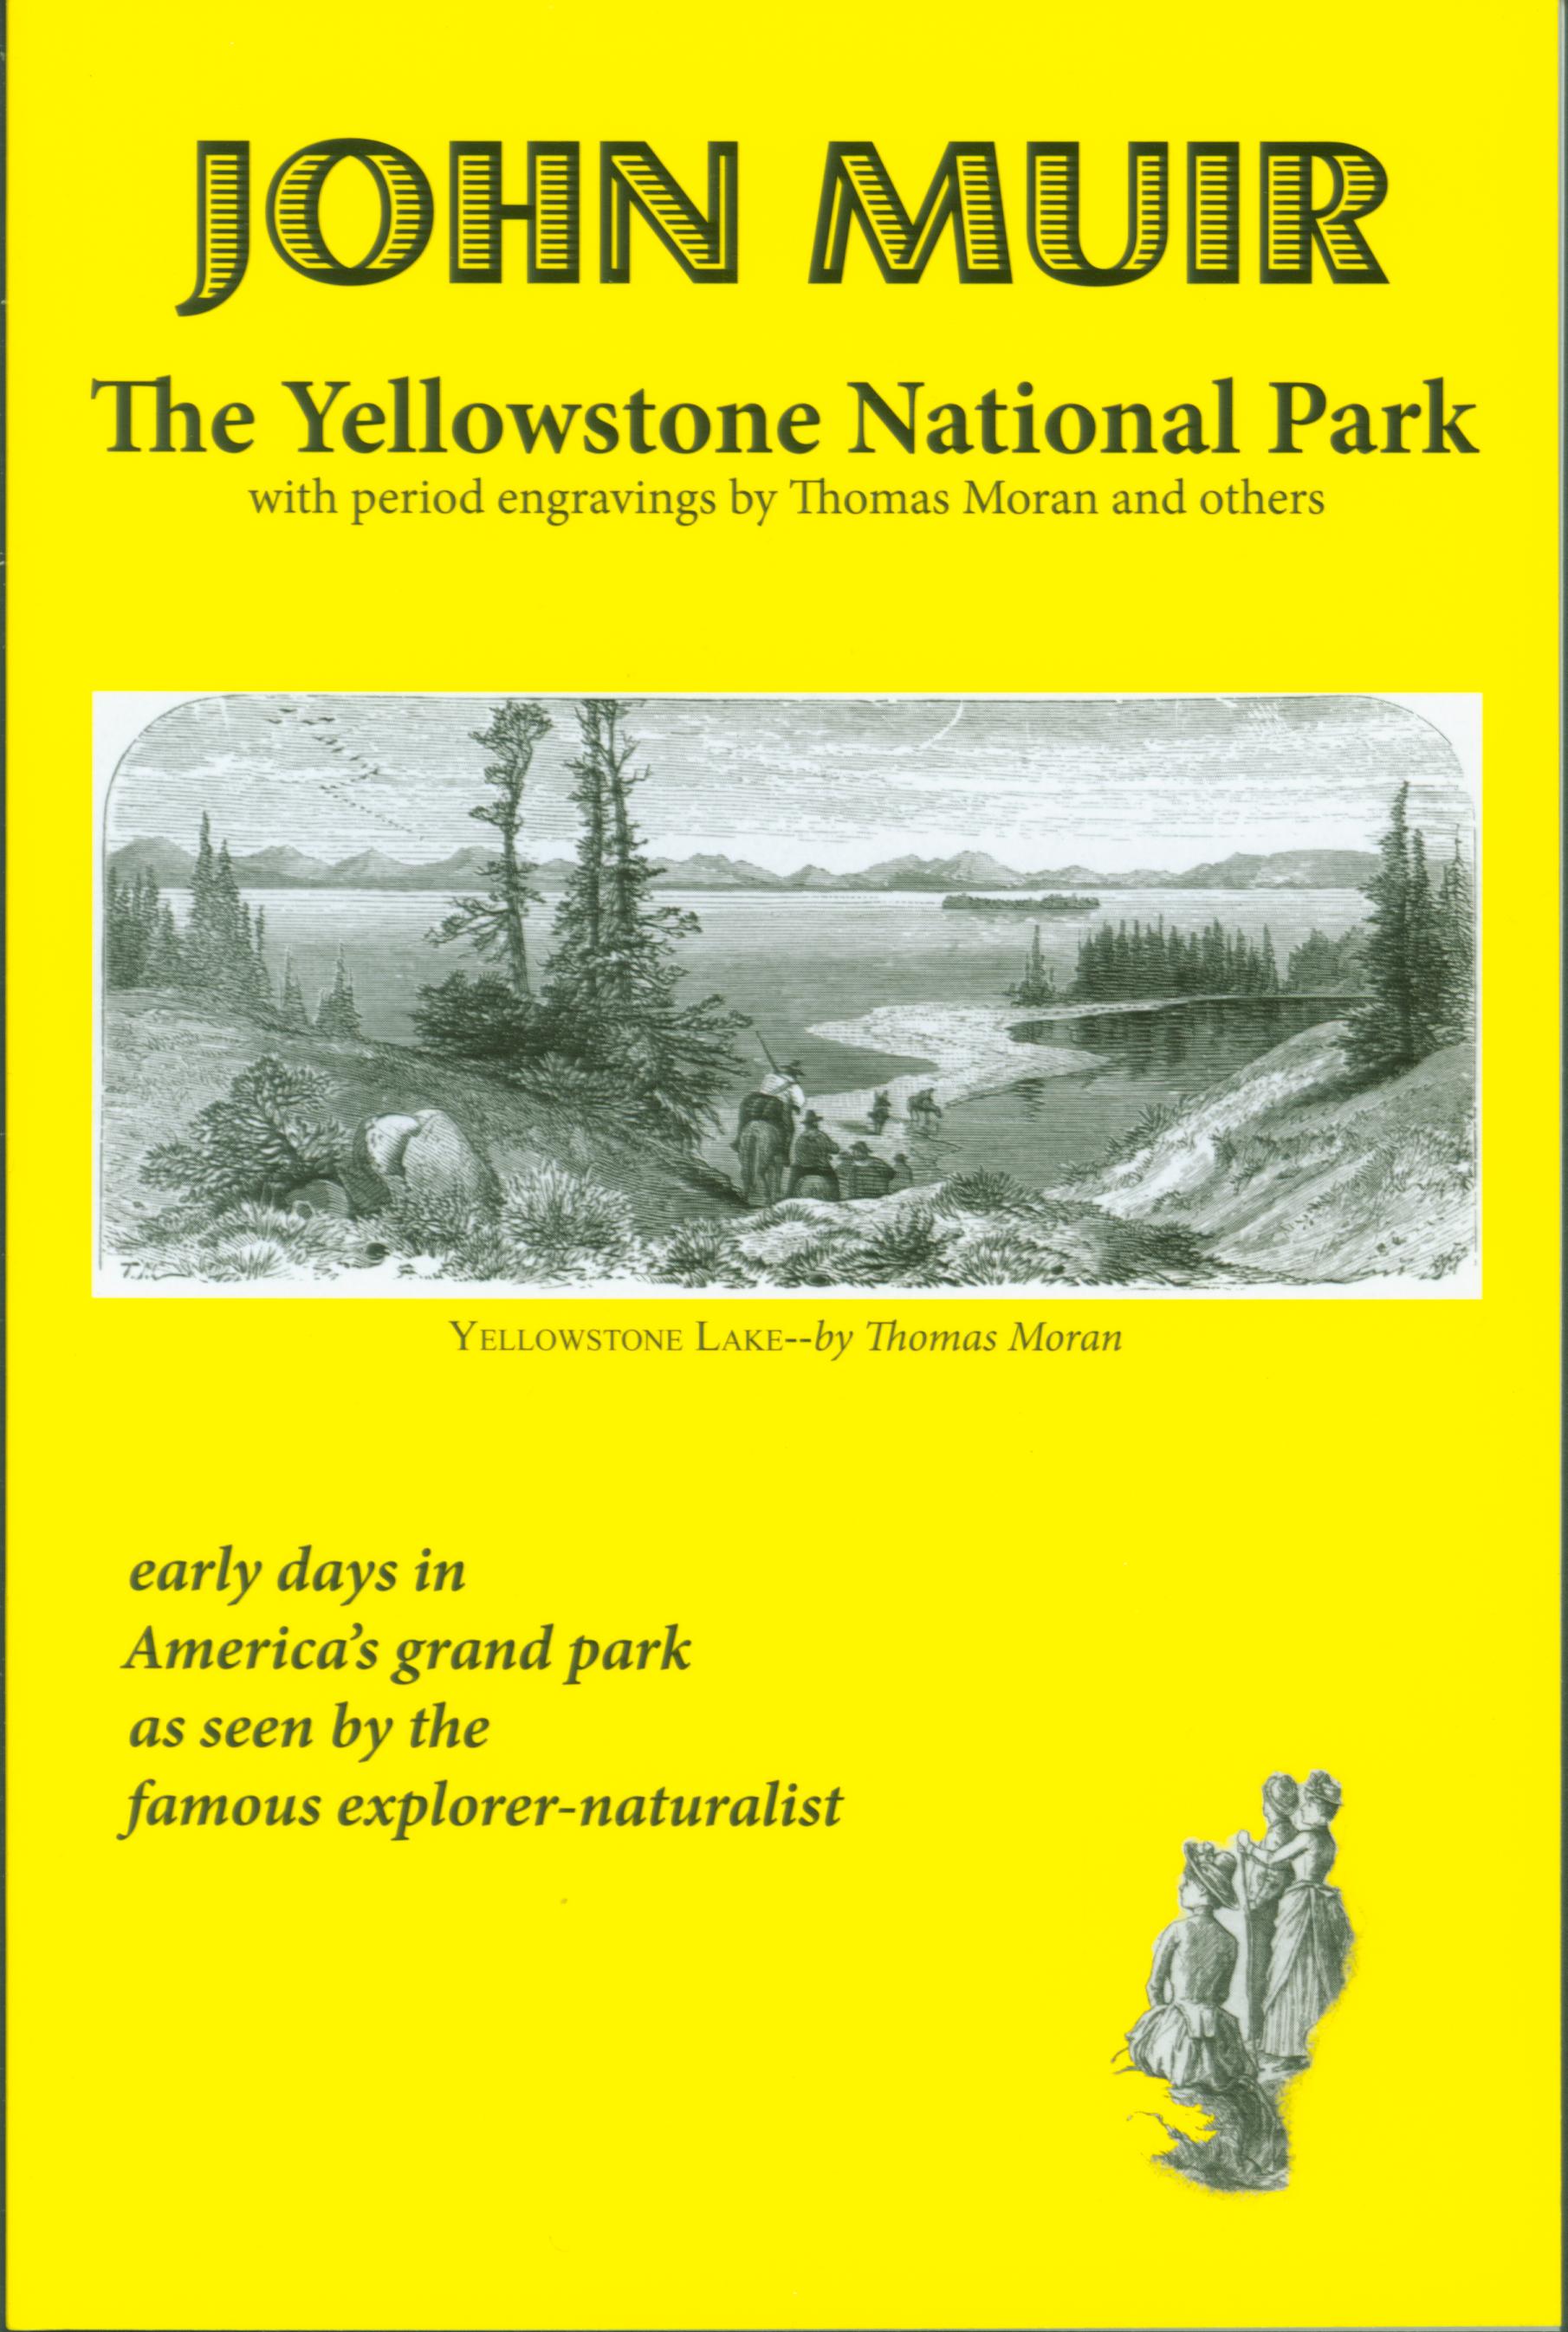 The Yellowstone National Park.